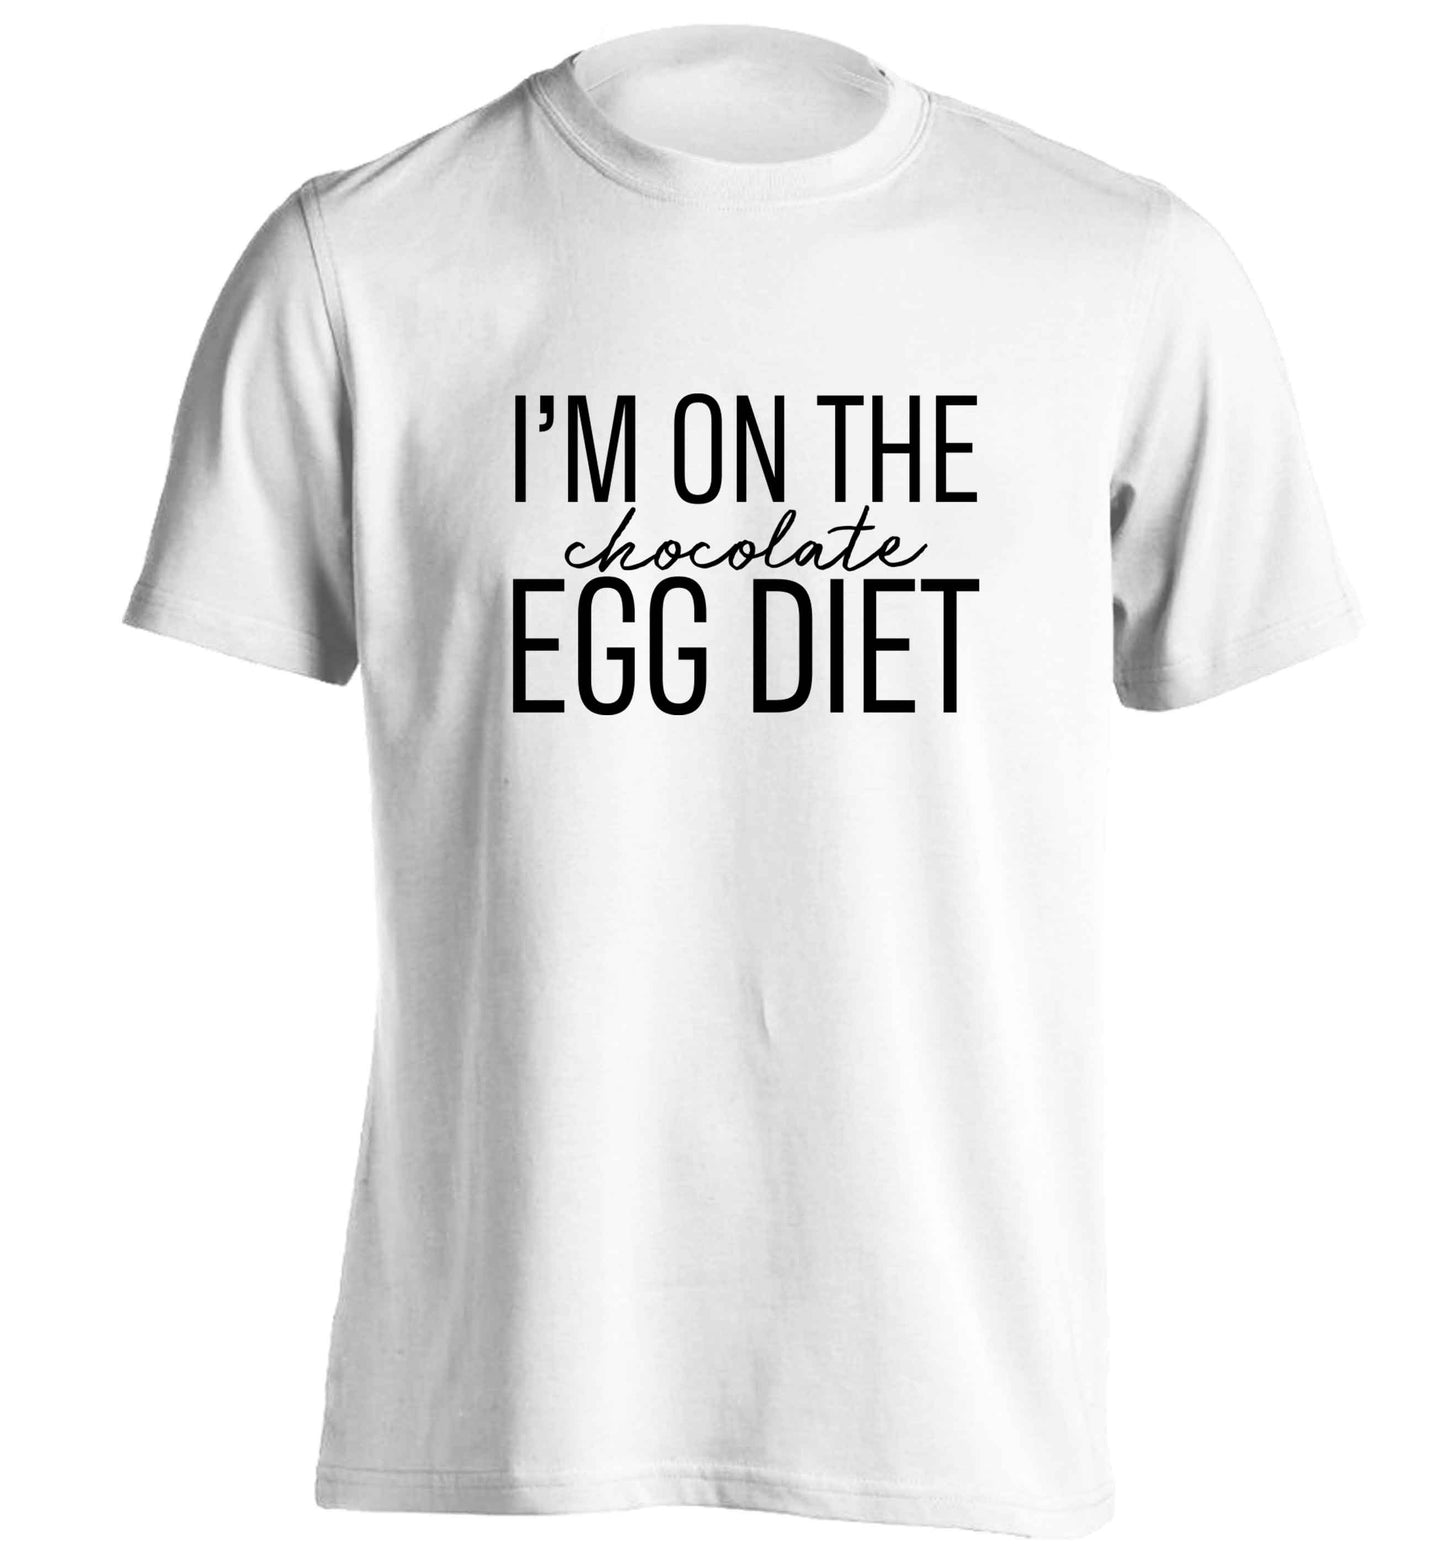 I'm on the chocolate egg diet adults unisex white Tshirt 2XL